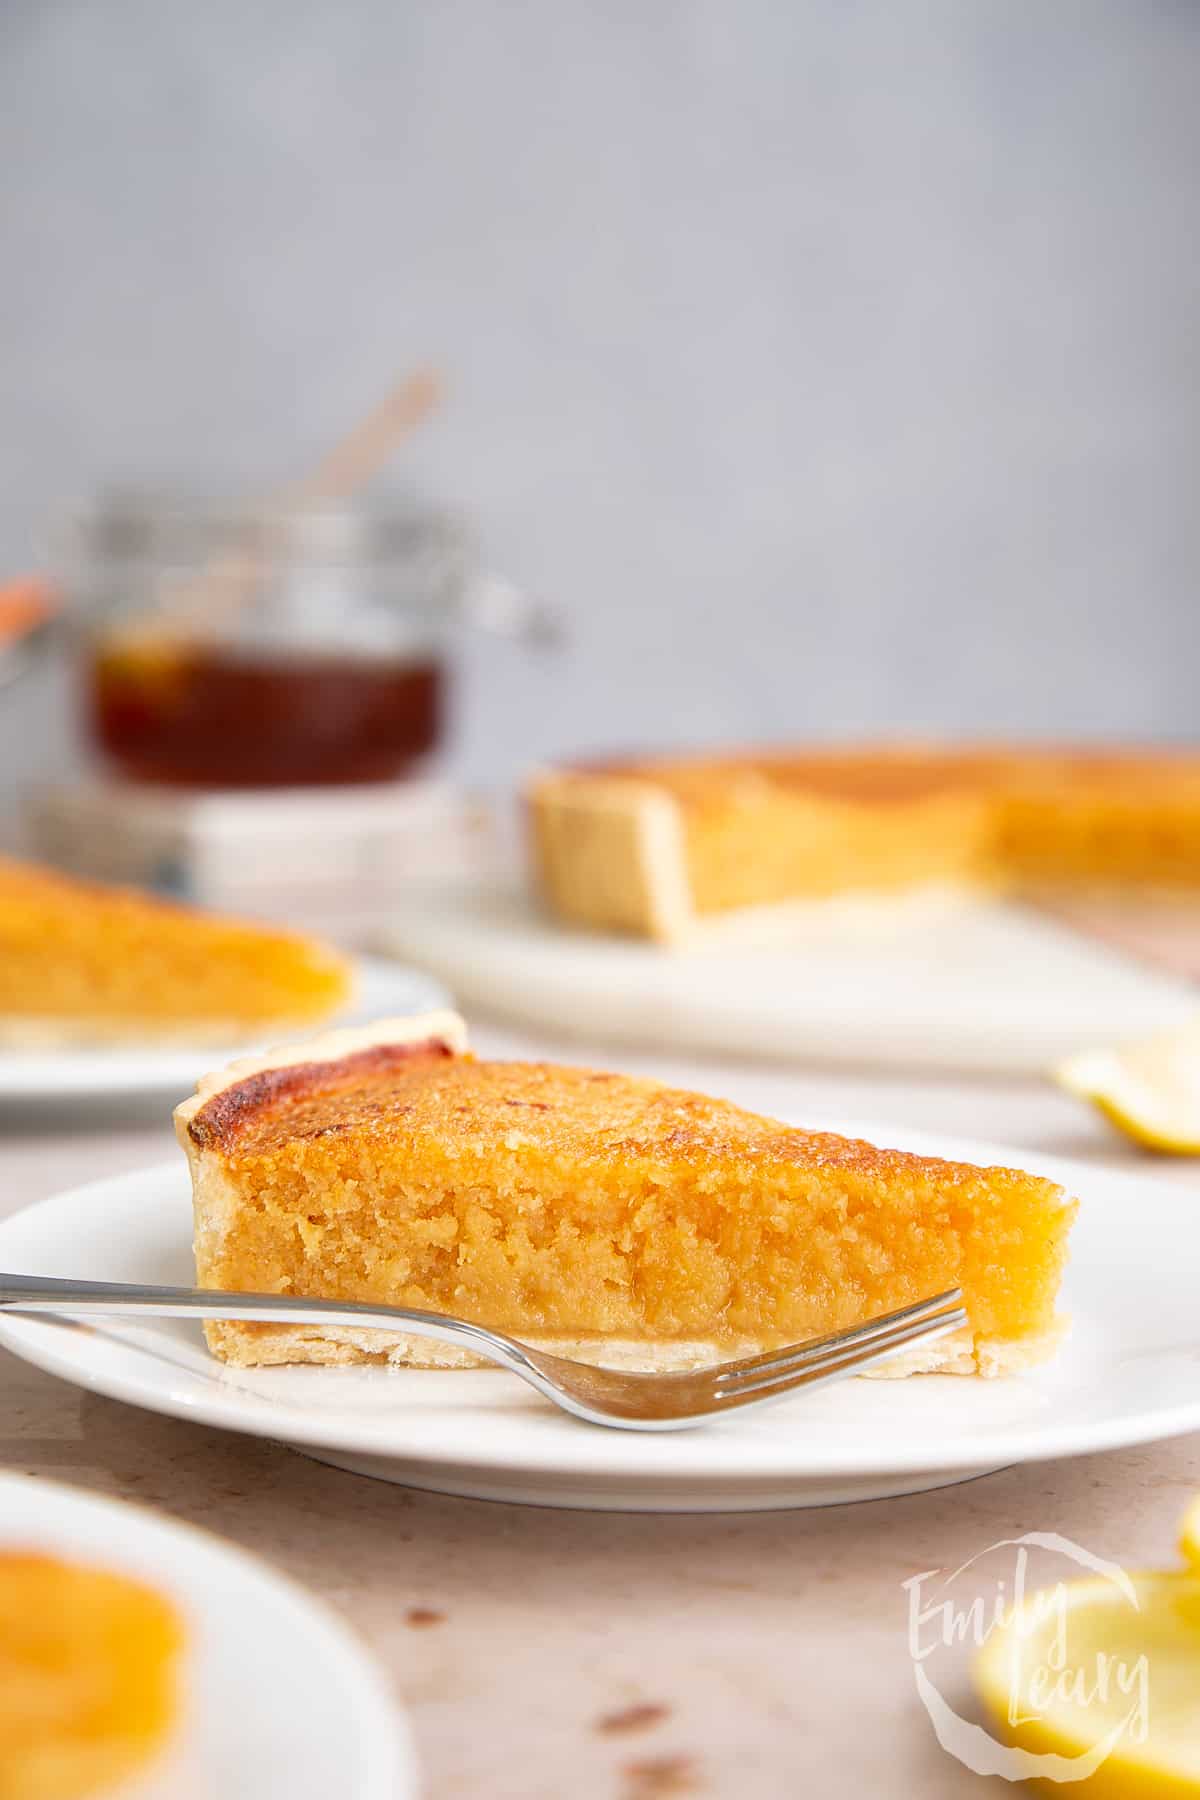 A side on shot of a lemon treacle tart slice on a white plate with a fork on the side.